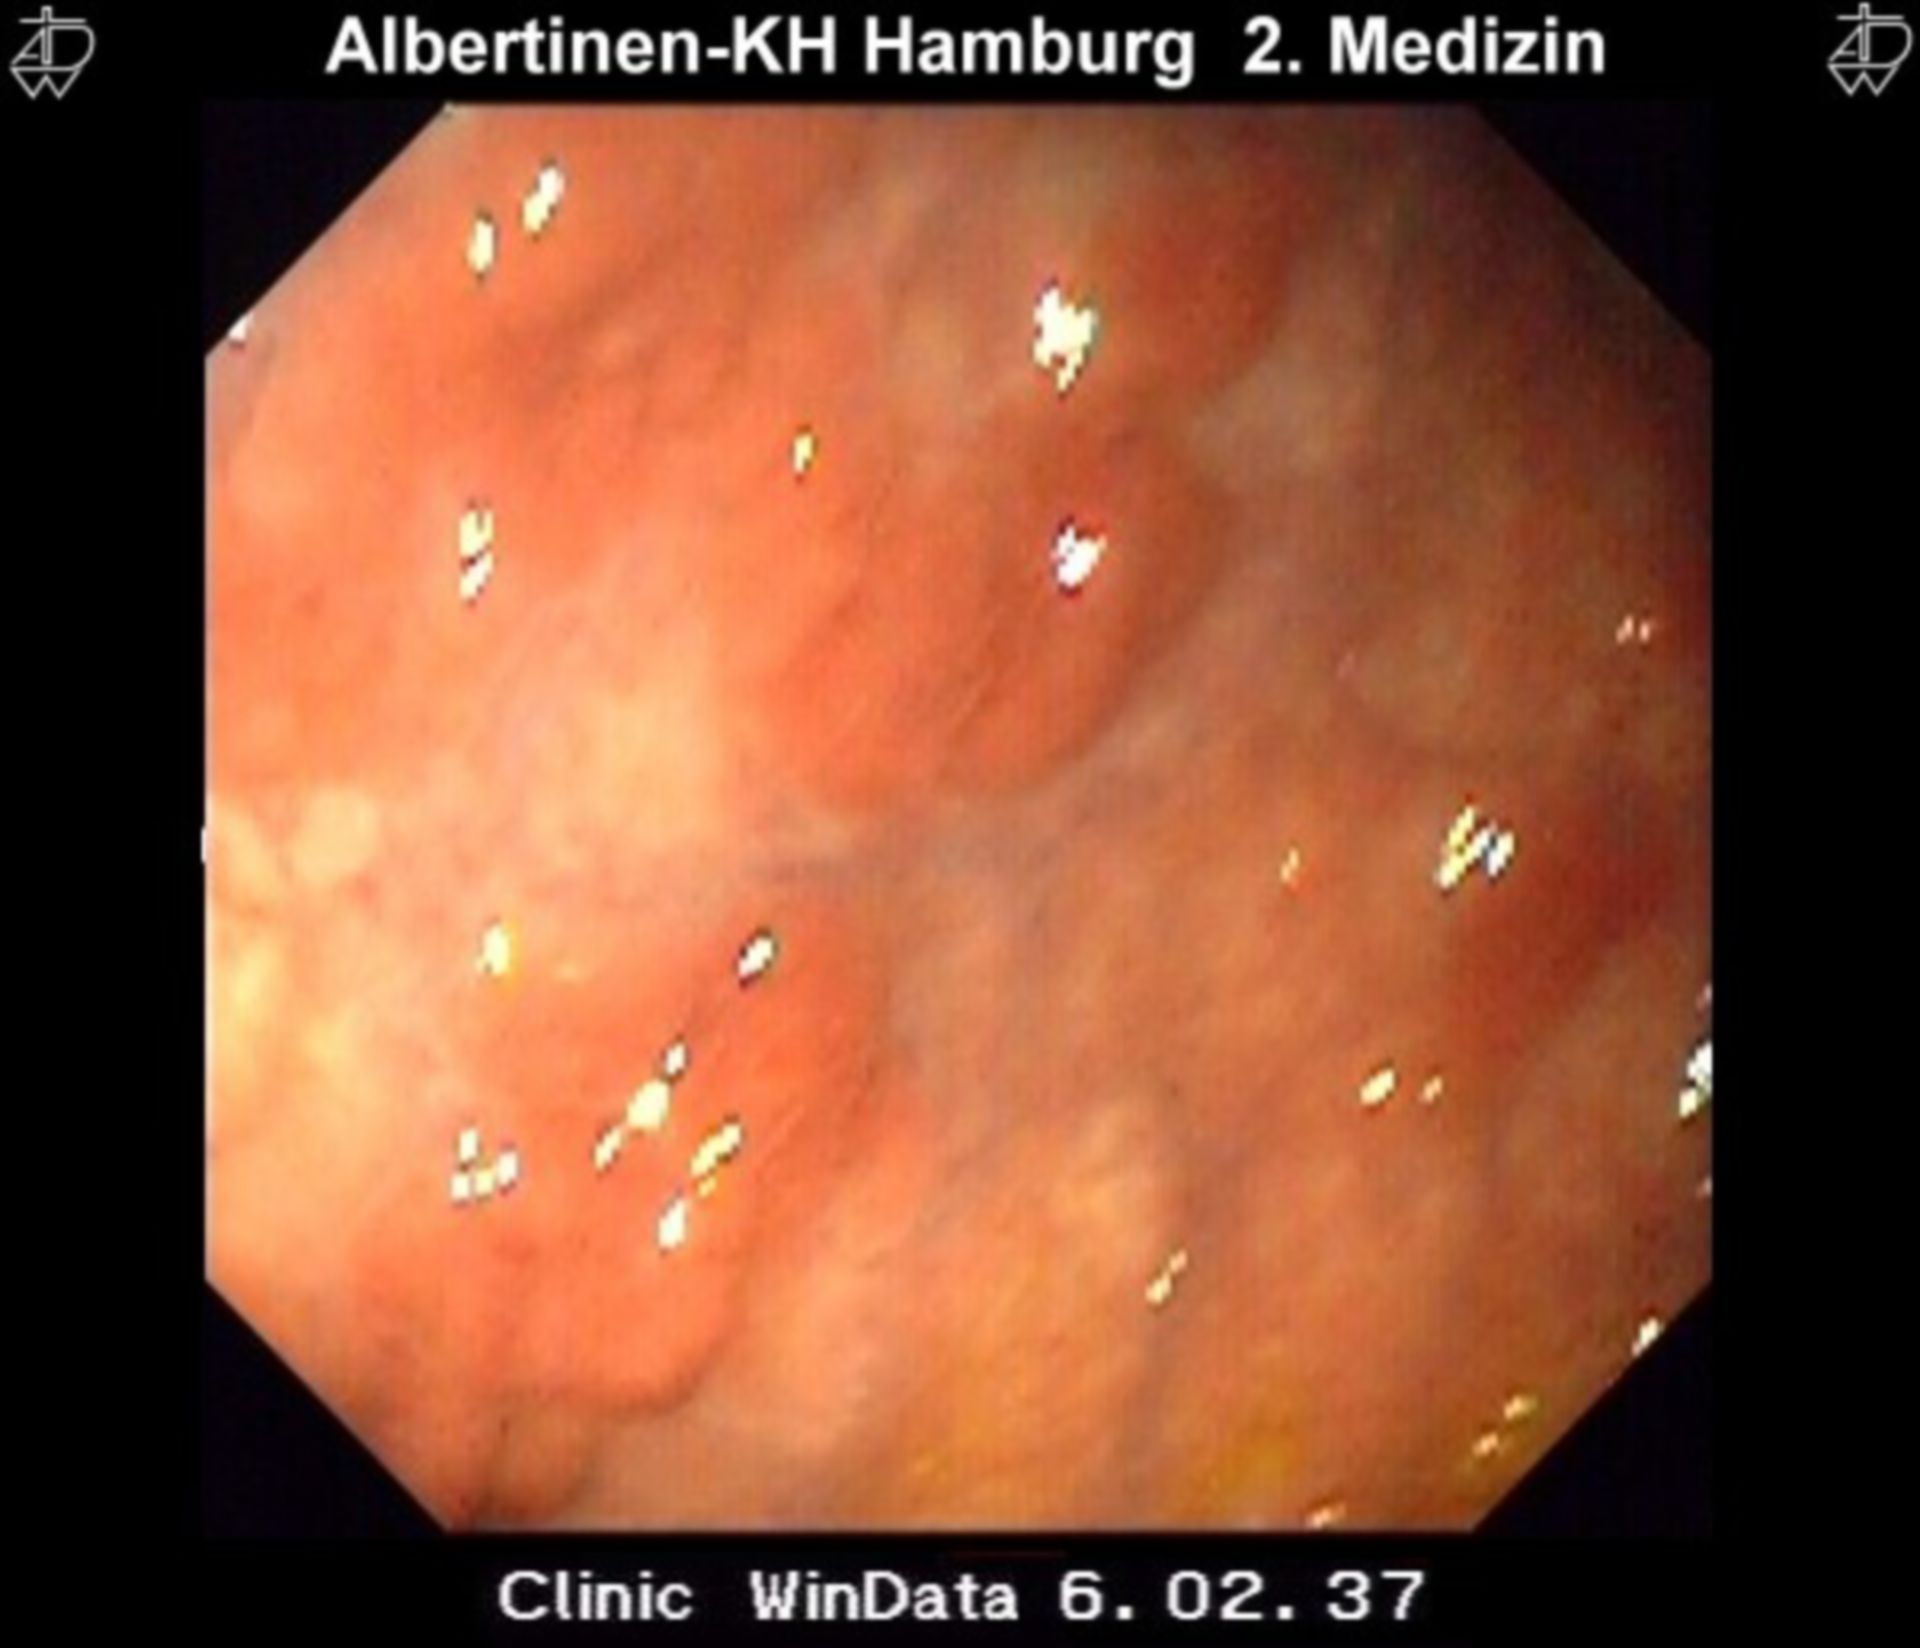 Atrophy of the gastric mucosa